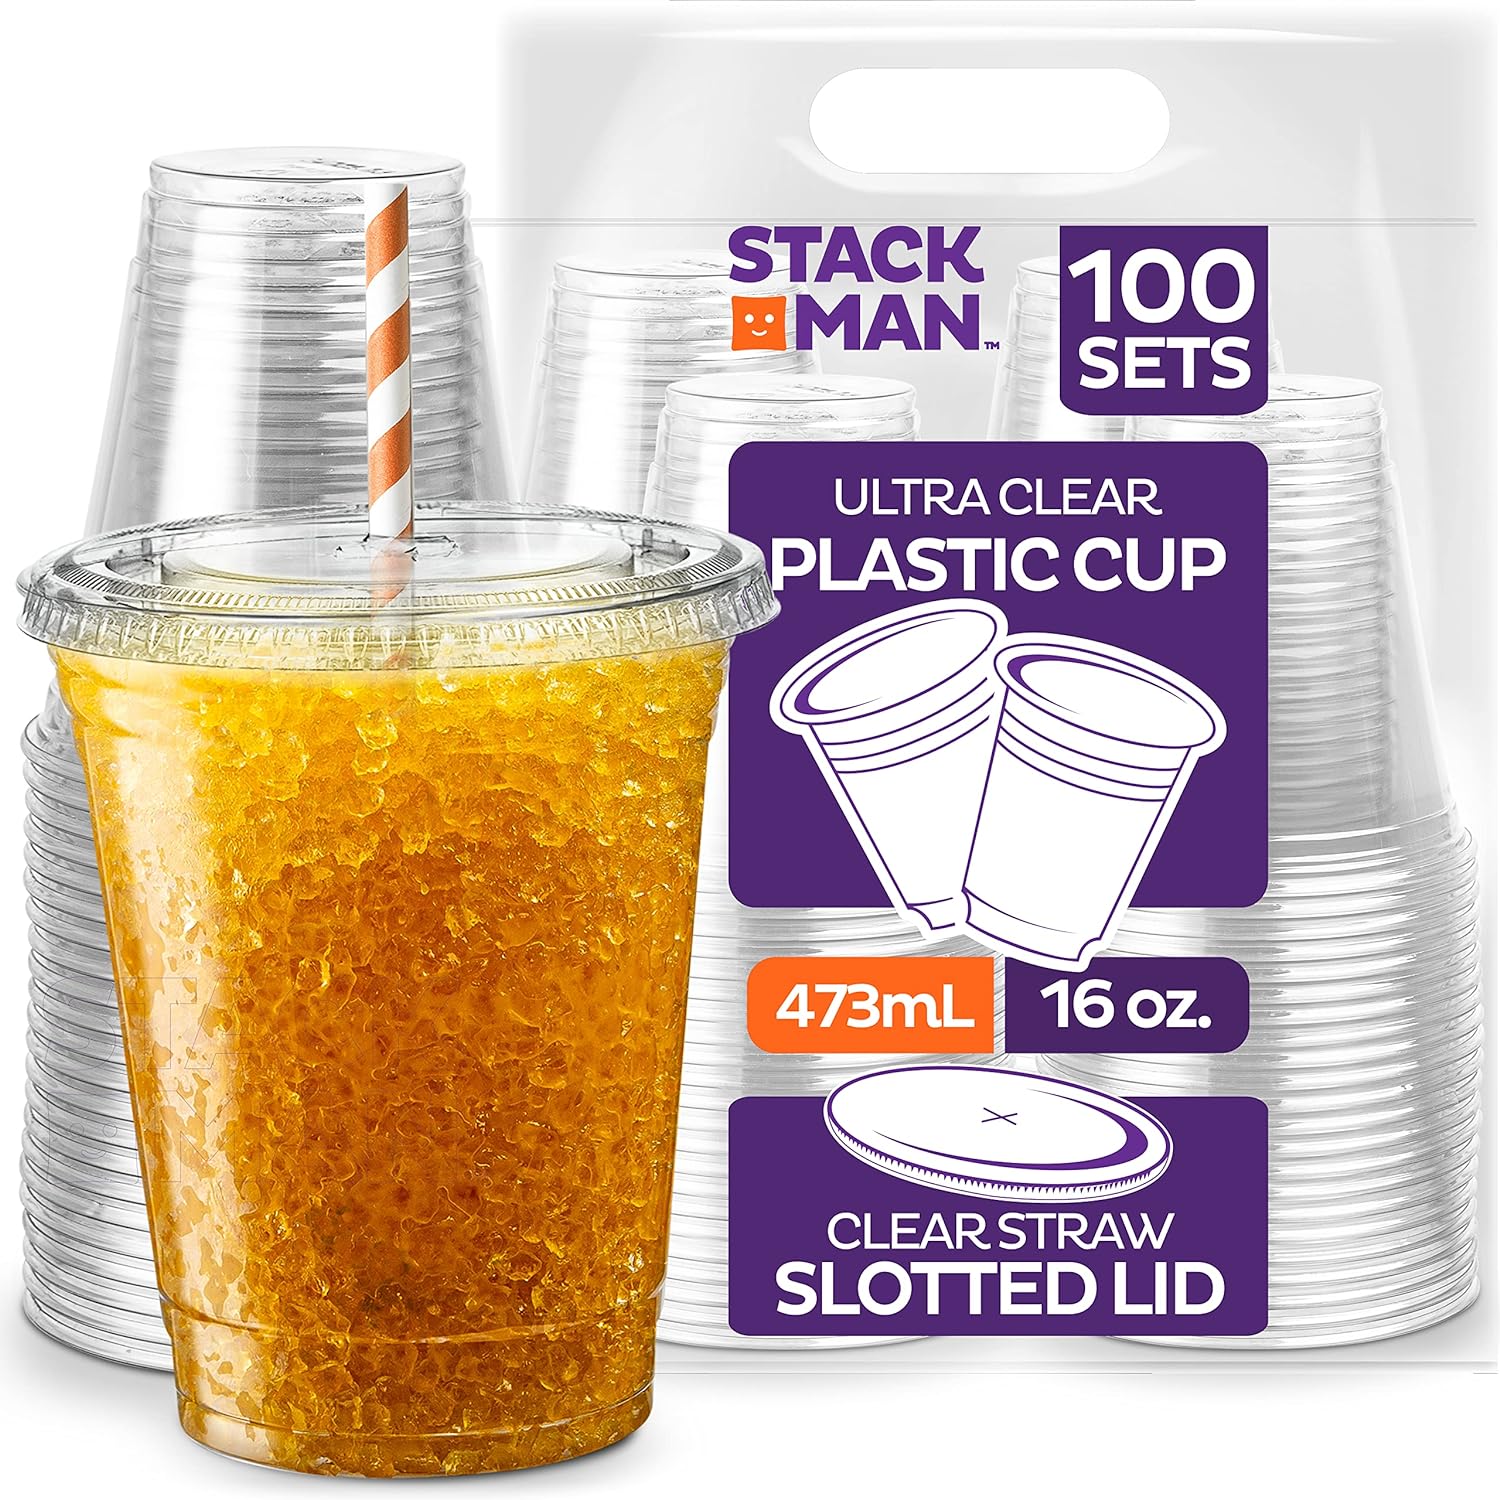 These cups and lids are sturdy, do not leak, do not crack and feel comfortable holding. Fit great in the car cup holder. Easy to hold in your hand. Takes a little "oomph" to jab in the straw, but that's likely the reason the tops don't split after doing so.Most bad reviews are from a few years ago, so maybe manufacturing process changed. I've never had a defective cup or lid. We use these for almost all of our cold beverages with zero issues. My family loves using them. We keep them in stock as a staple item for all of my people running out the door with a bevvie in hand.